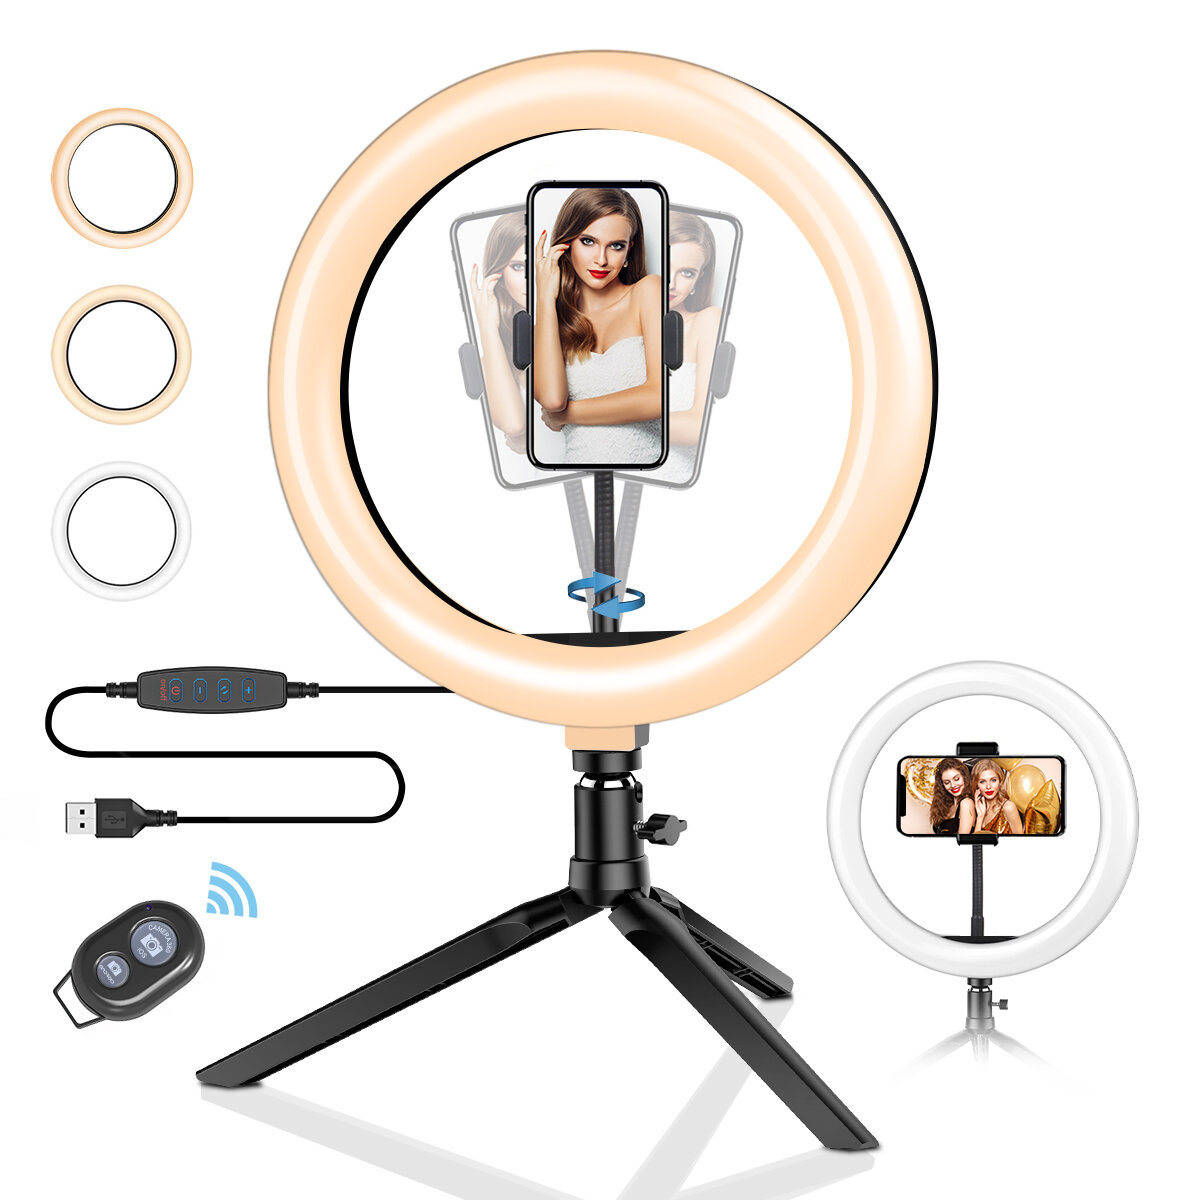 

10Inch Dimmable LED Ring Light Tripod Stand USB Plug for TikTok Youtube Live Stream Makeup with Phone Clip, Black